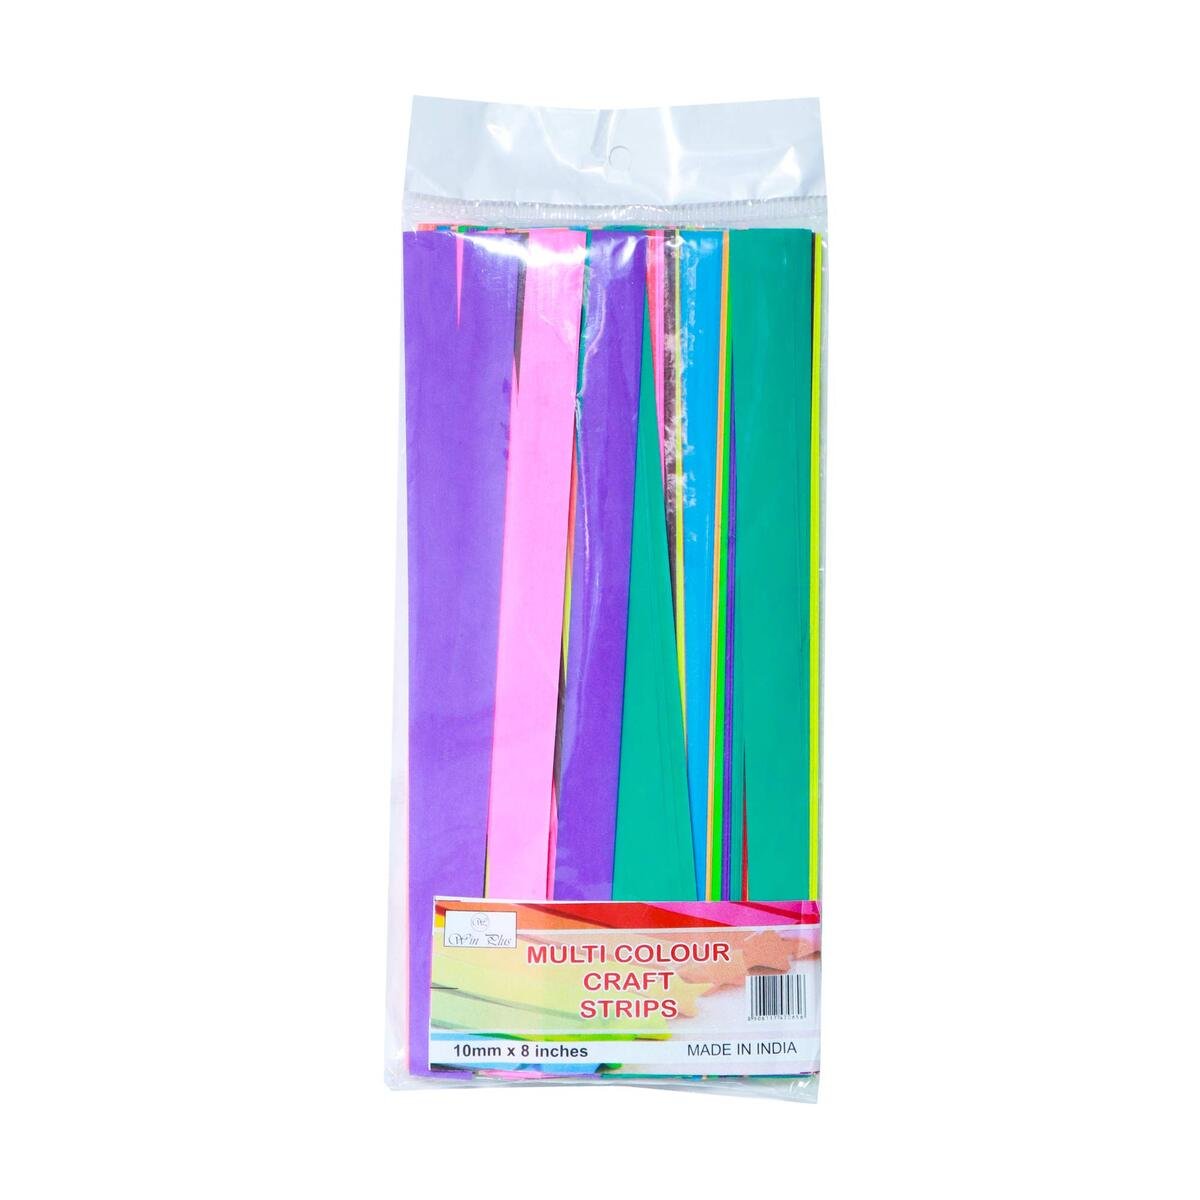 Win Plus Multicolor Craft Strips EX62 10mmx8inches